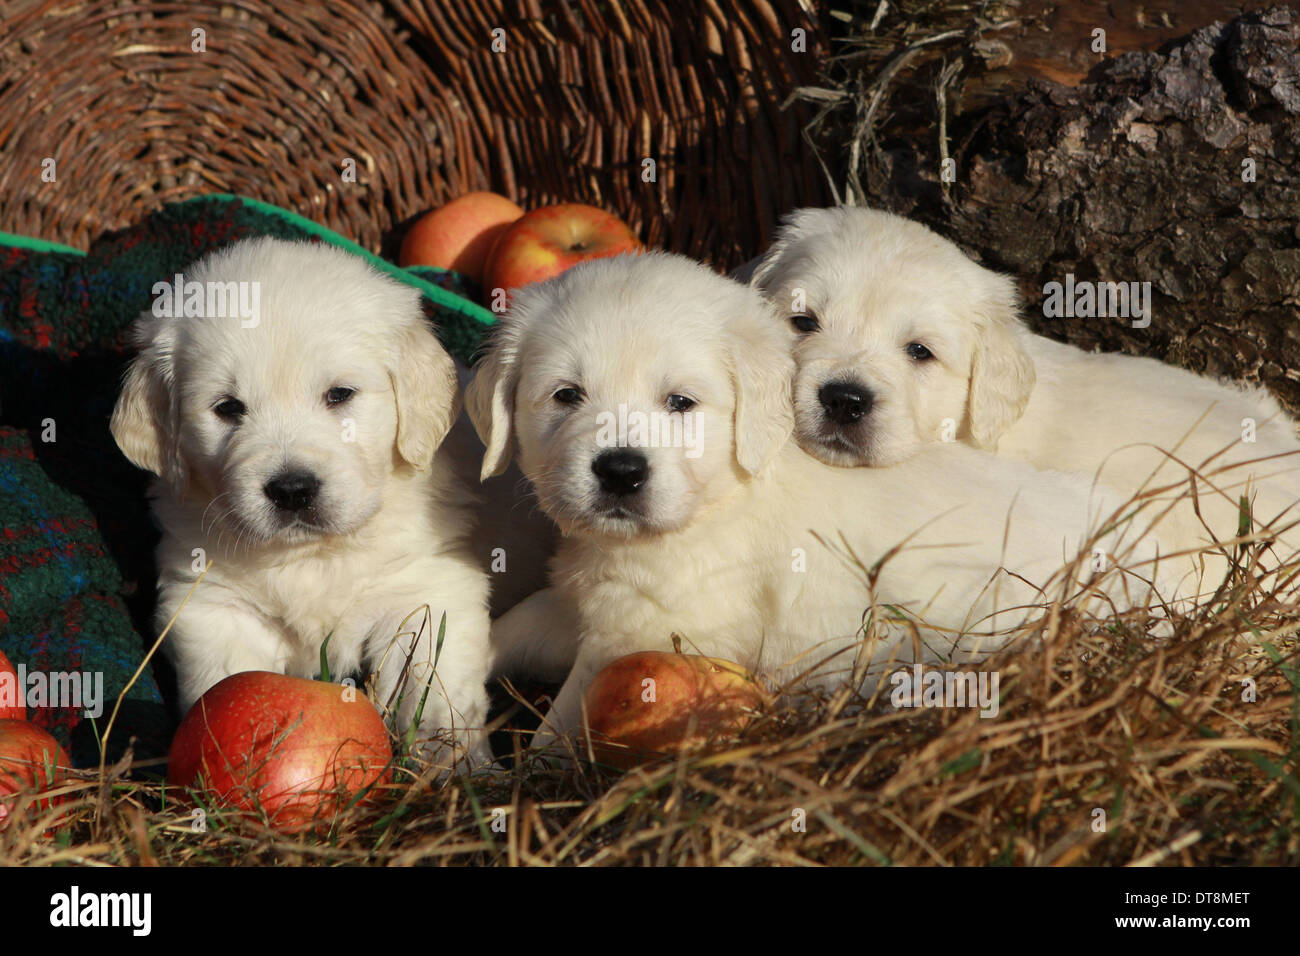 Golden Retriever Three male puppies (5 weeks old) lying in hay next to ripe apples Stock Photo